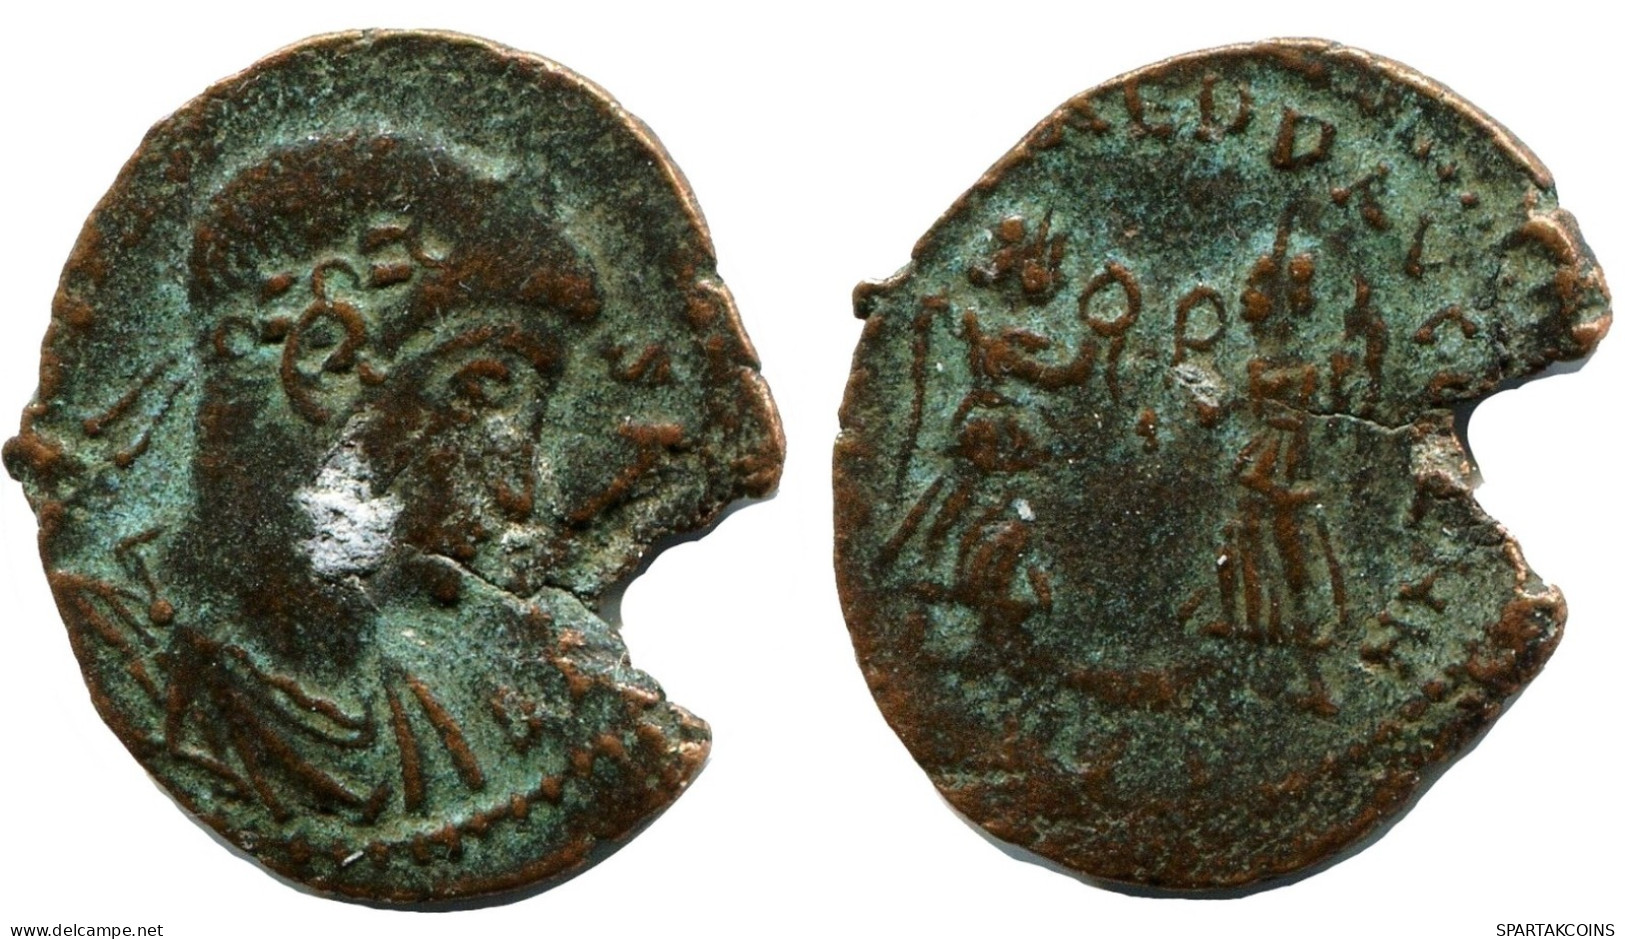 CONSTANS MINTED IN ROME ITALY FROM THE ROYAL ONTARIO MUSEUM #ANC11494.14.U.A - L'Empire Chrétien (307 à 363)